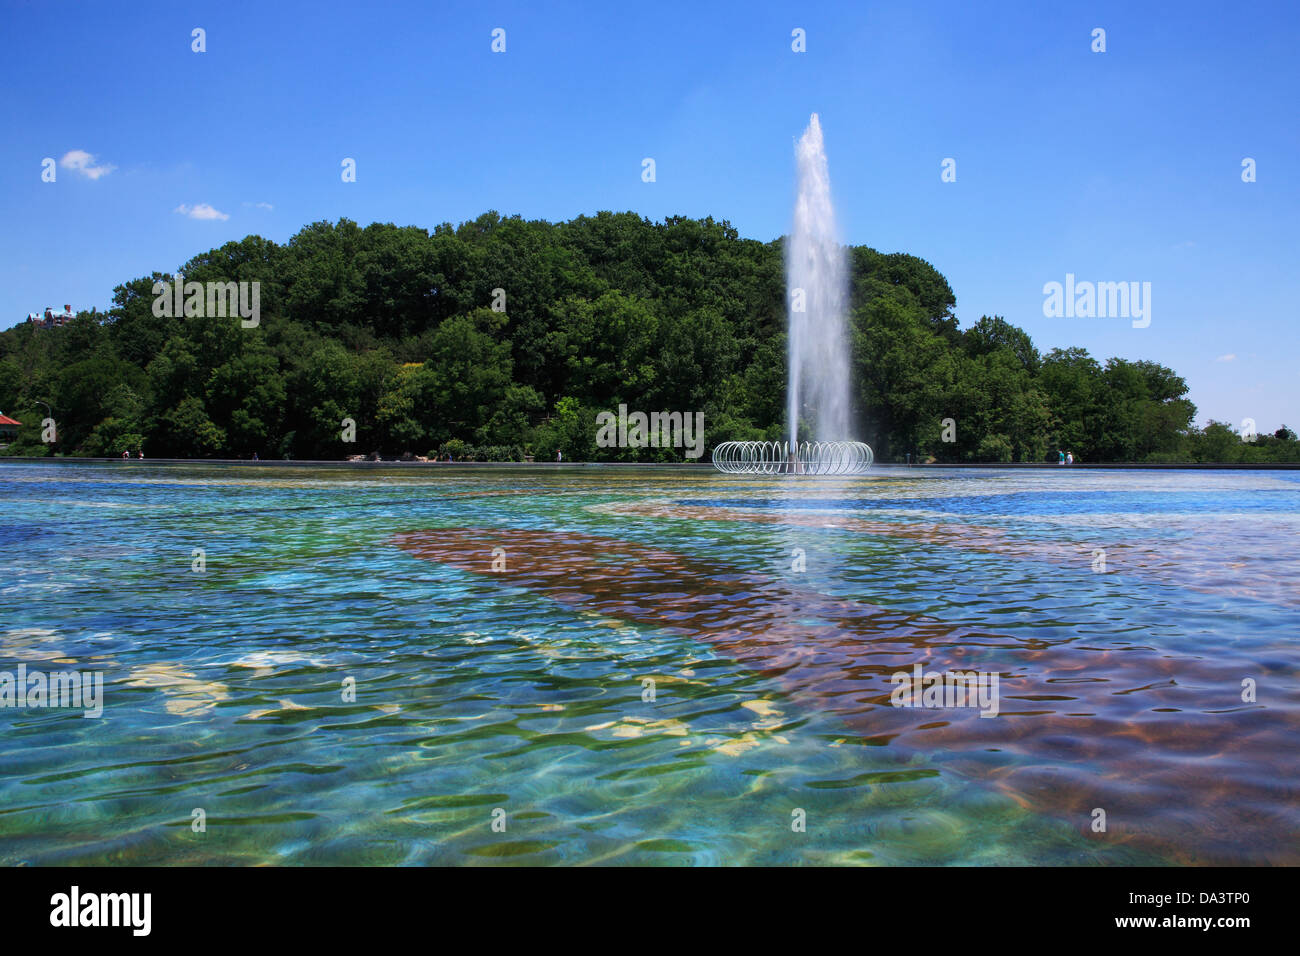 A Water Fountain and Reflecting Pool At Eden Park In Cincinnati Ohio, USA Stock Photo